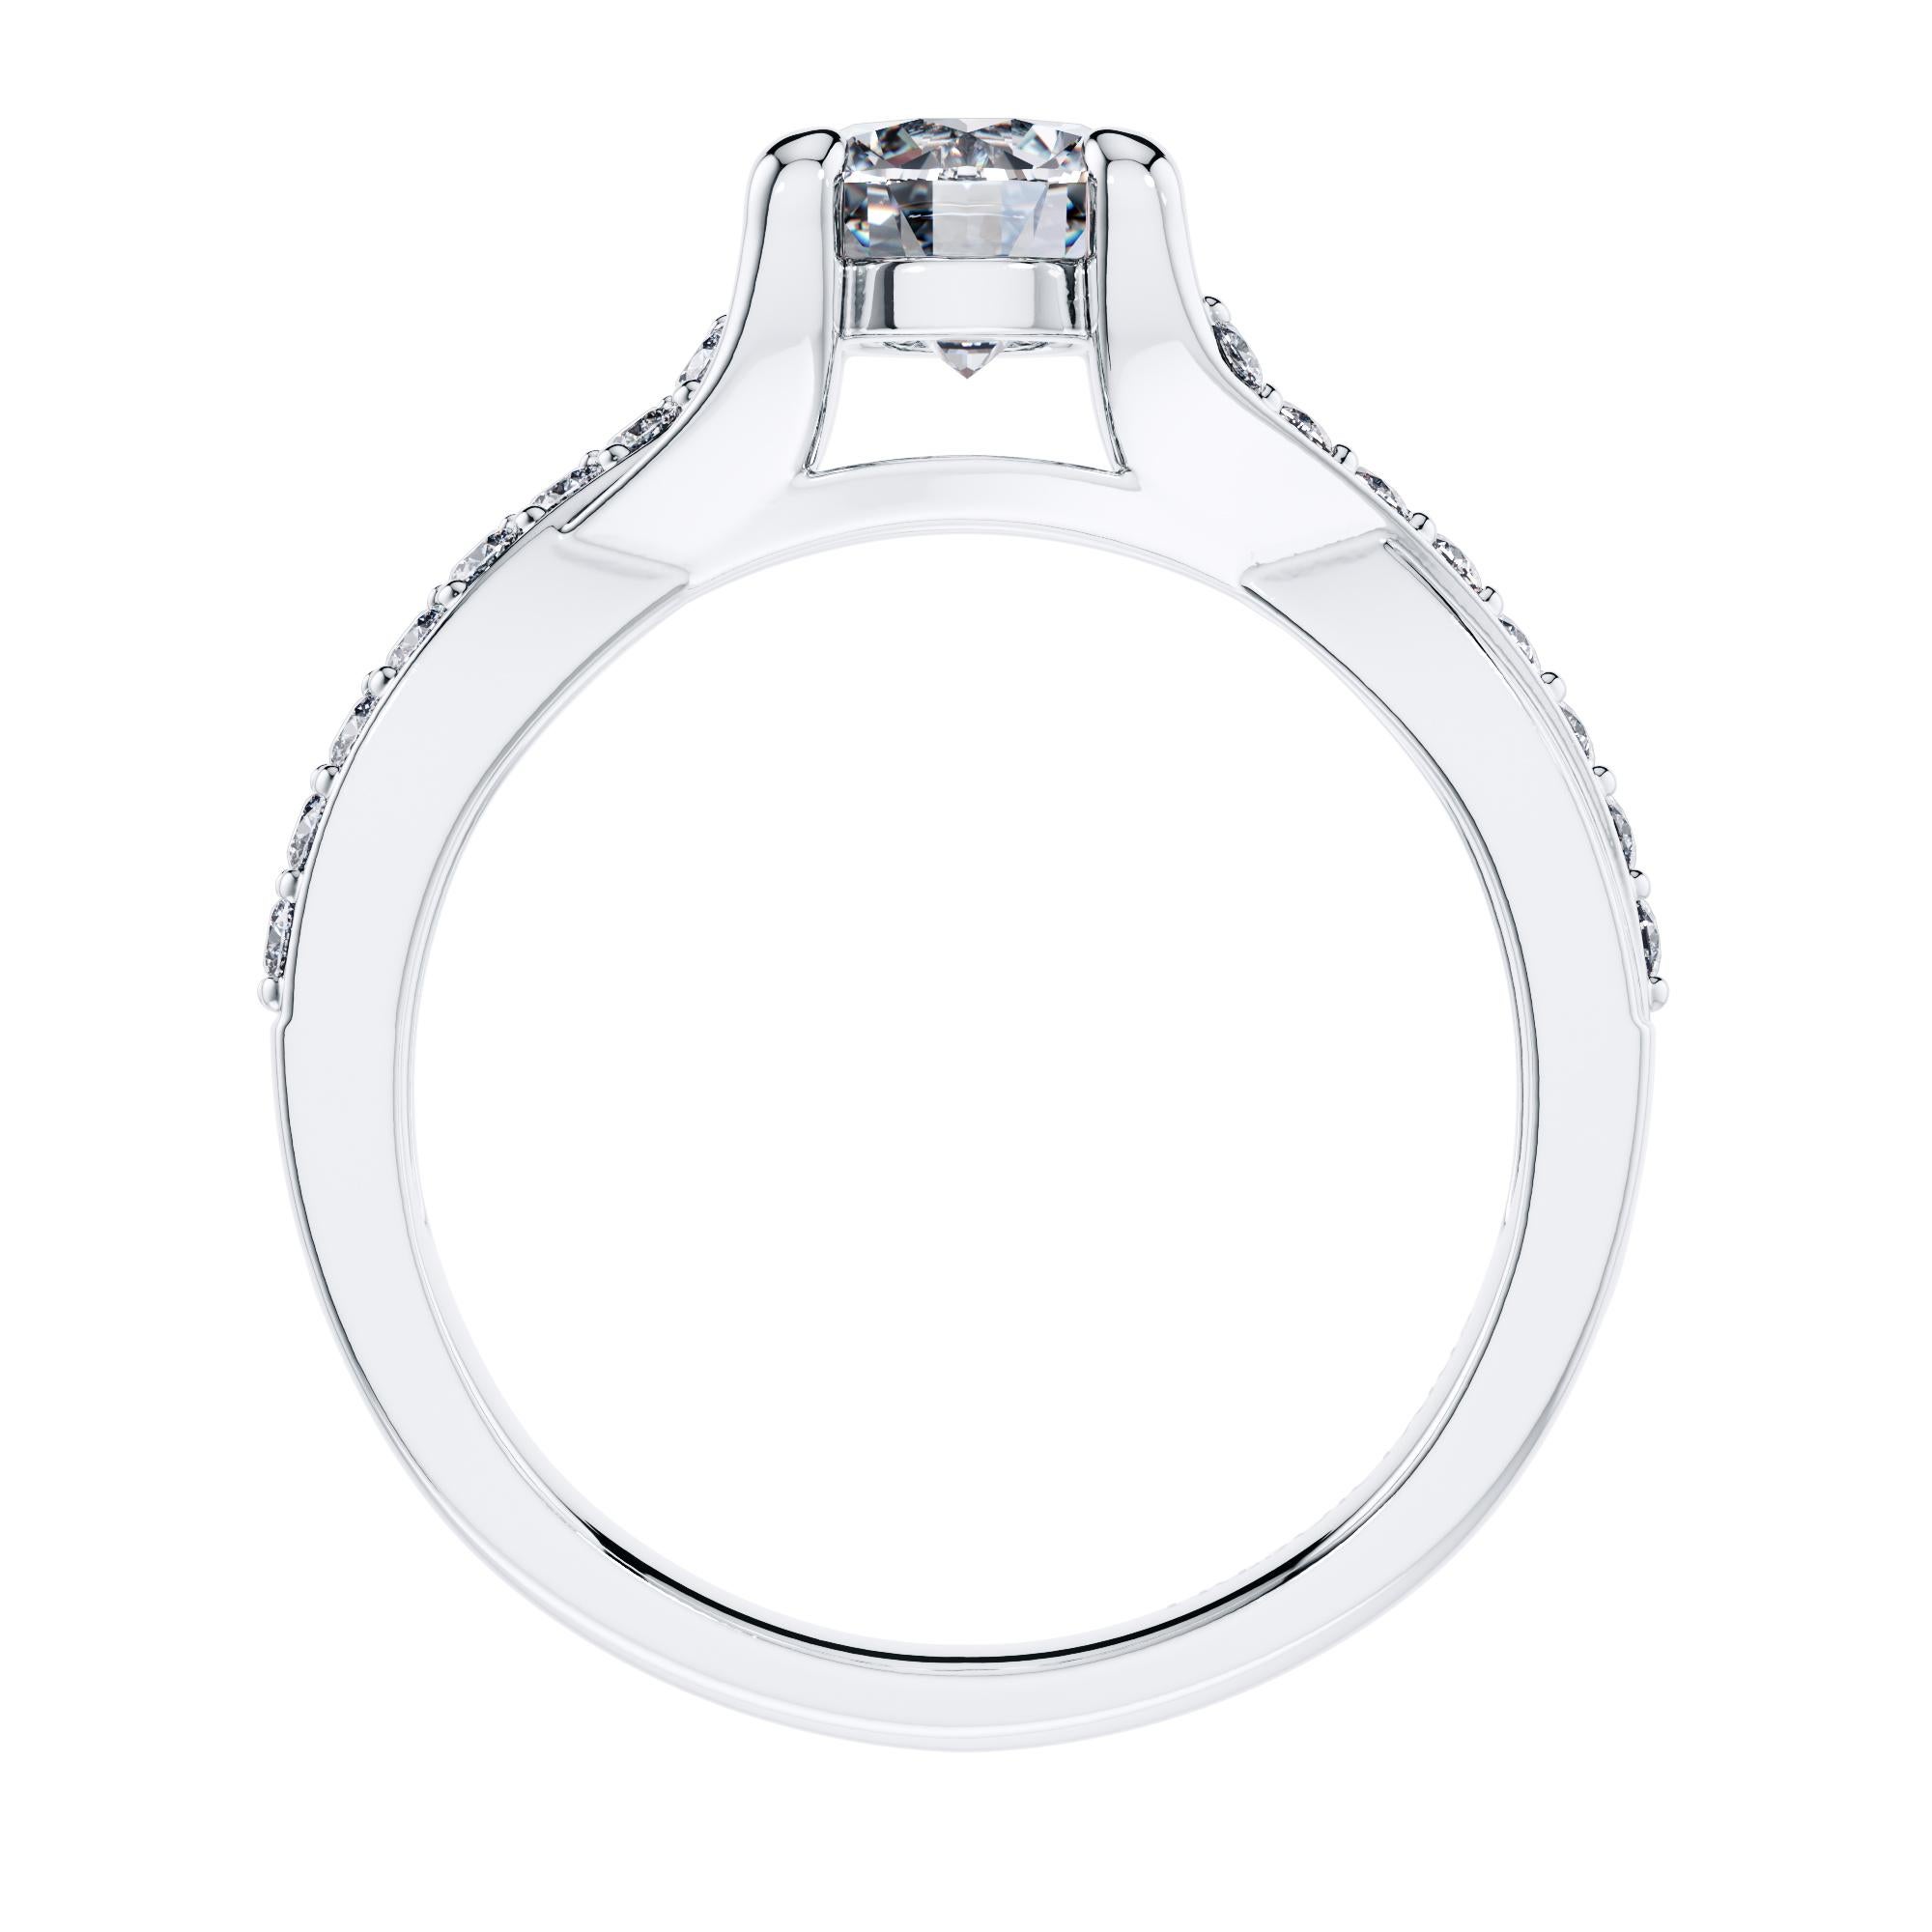 For a beautifully entwined journey together, this gleaming twisted vine modern classic engagement ring. Handmade in 18 Karat White Gold, with a total of 0.51 Carat White Diamond. Set in an open gallery 4 prong mount with a split shank that has one